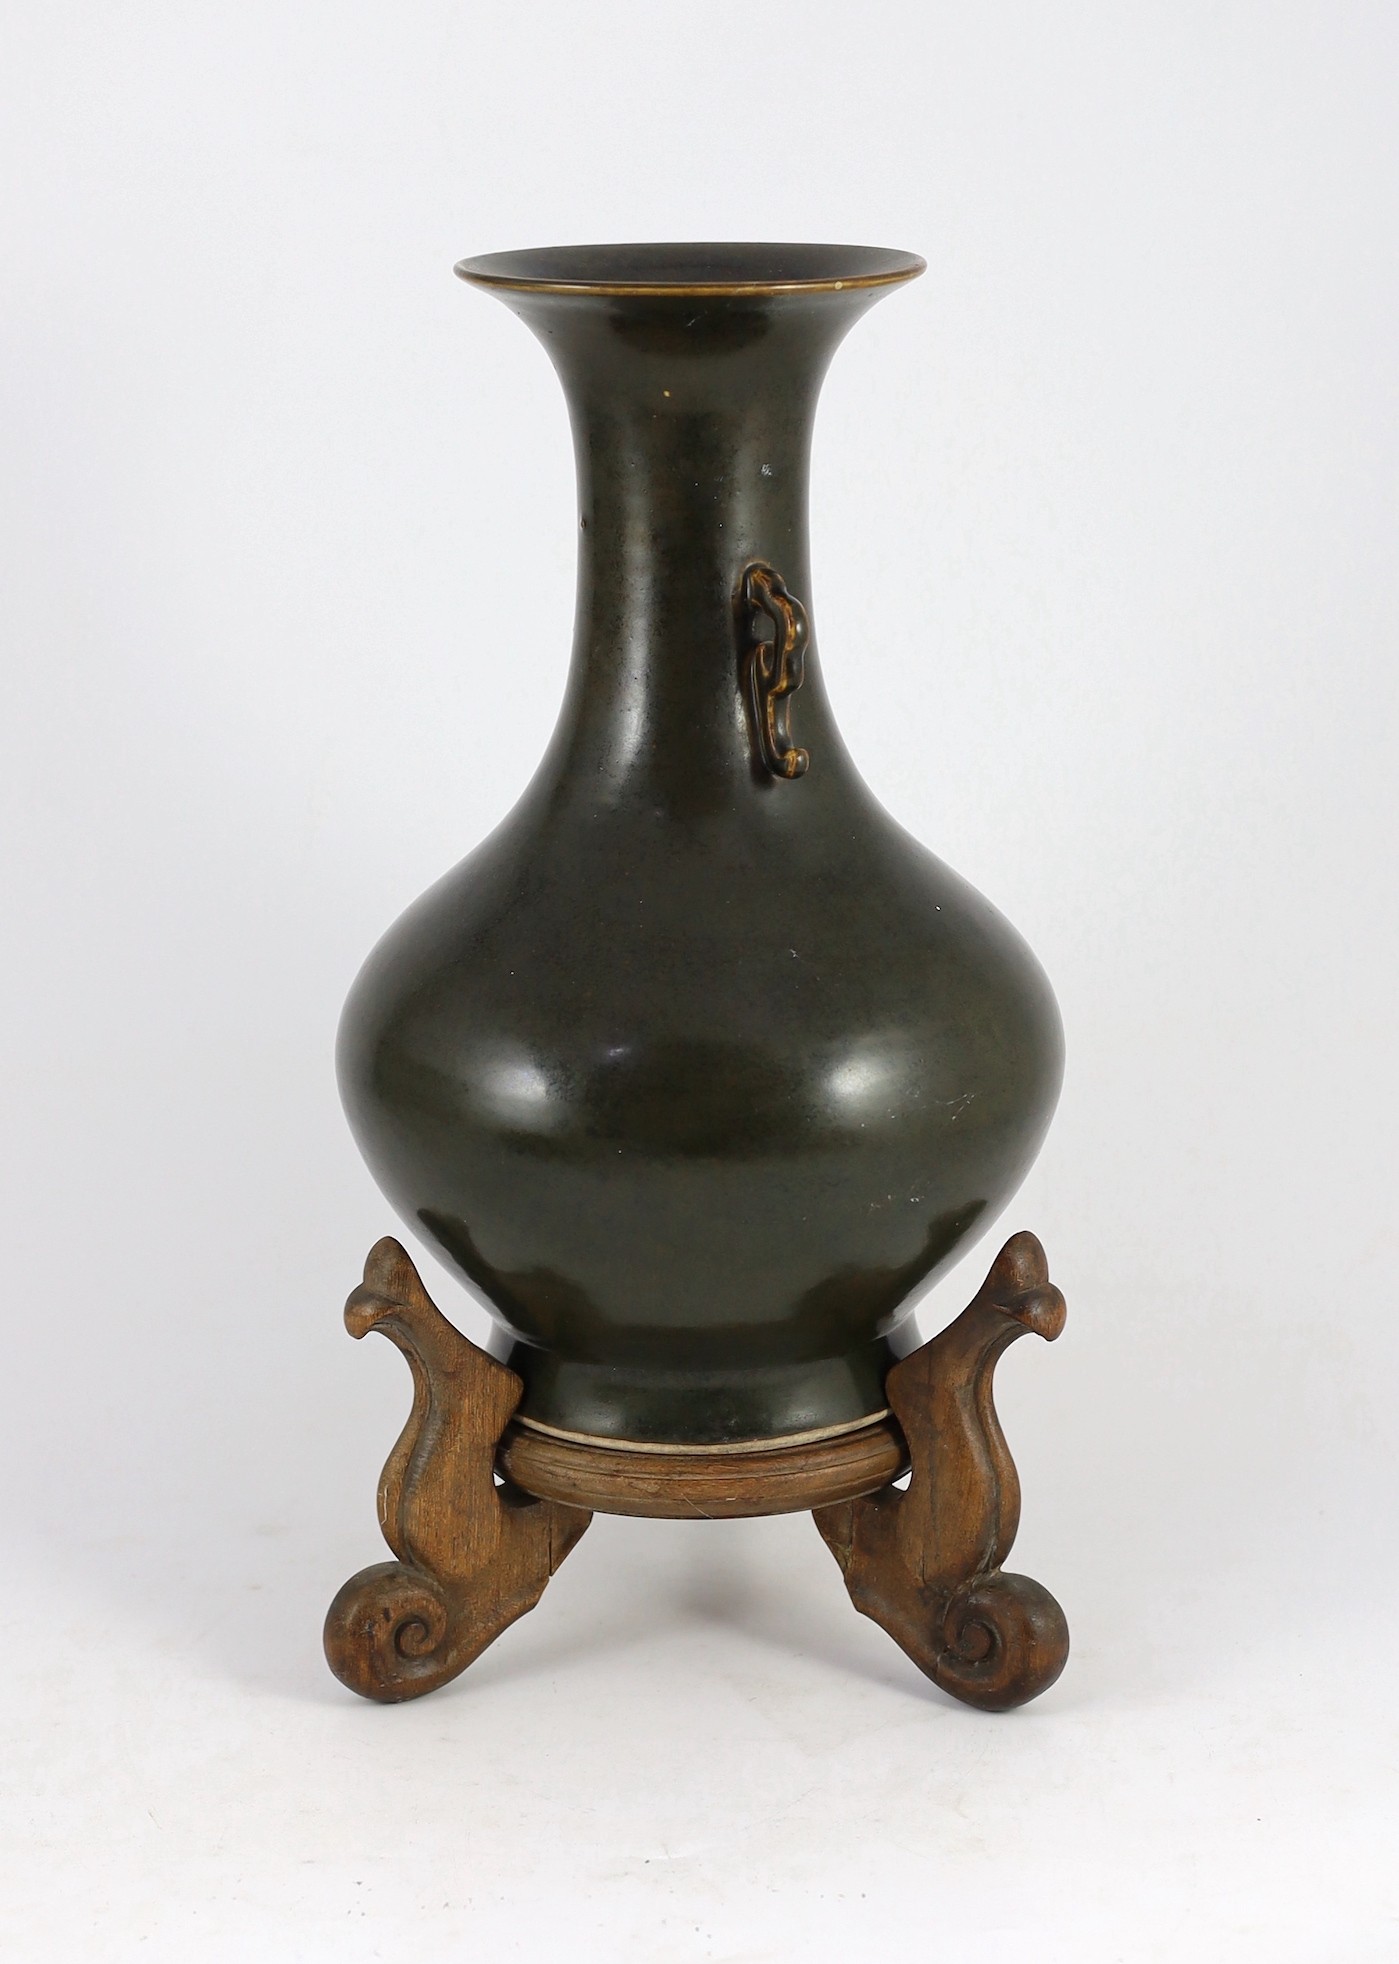 A Chinese Jian style brown glazed vase, hu, 18th/19th century, 31.5cm high, cracked, wood stand